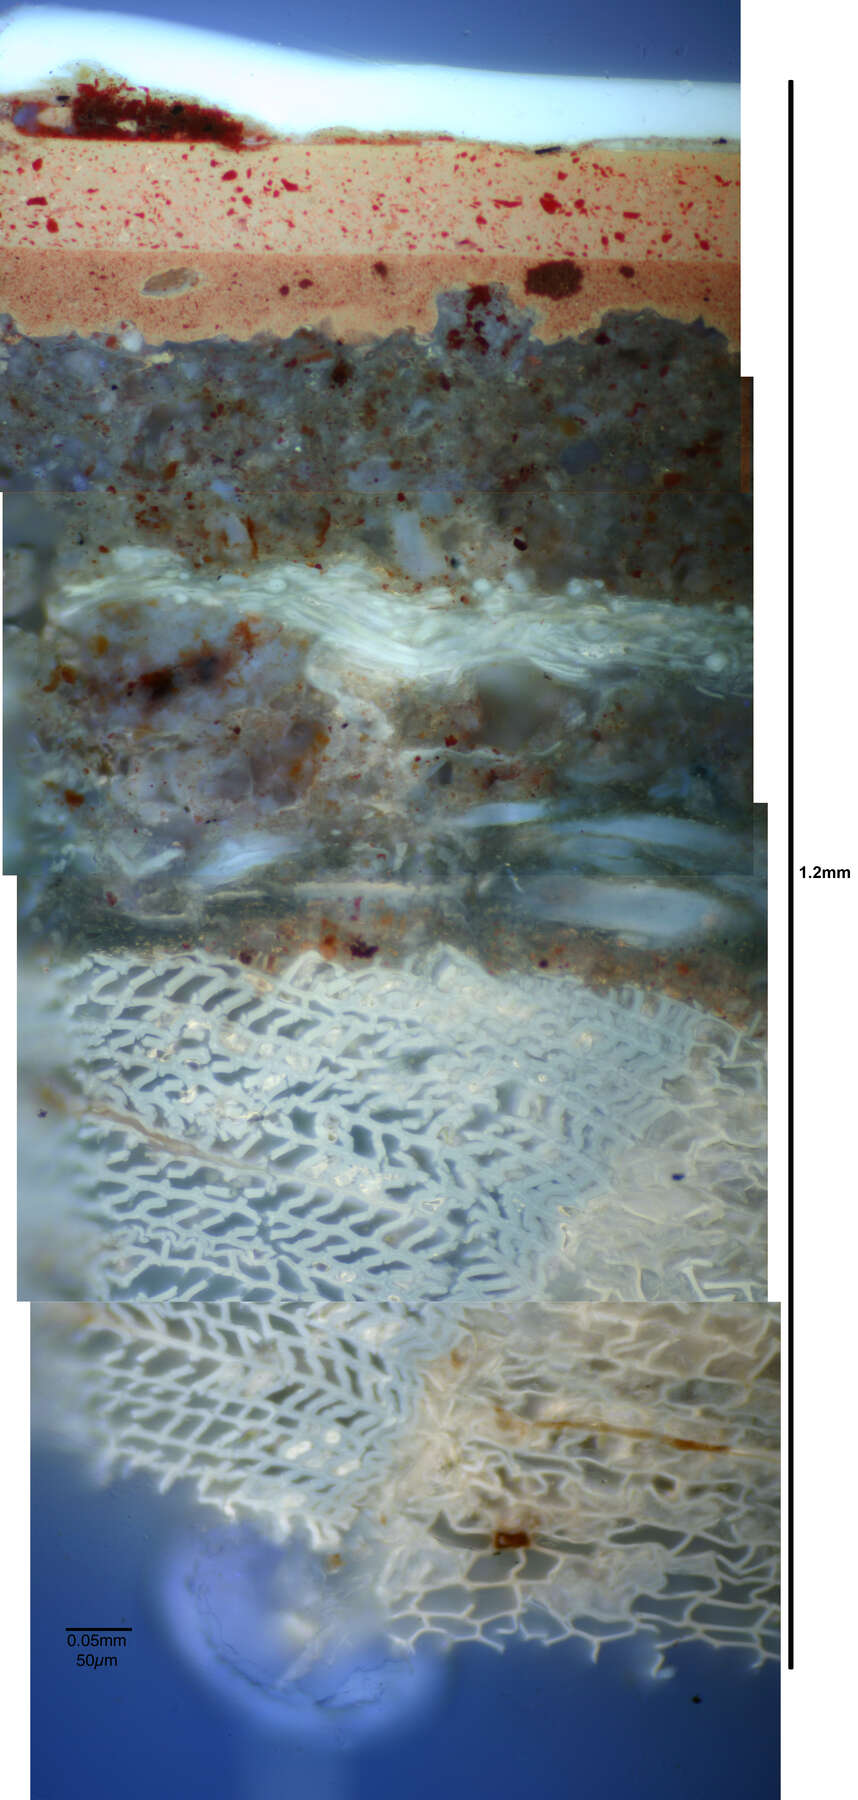 long vertical image made up of smaller horizontal photographs showing the various shades of blue, white, brown, beige and textures in the multi-layered lacquer as seen under UV light